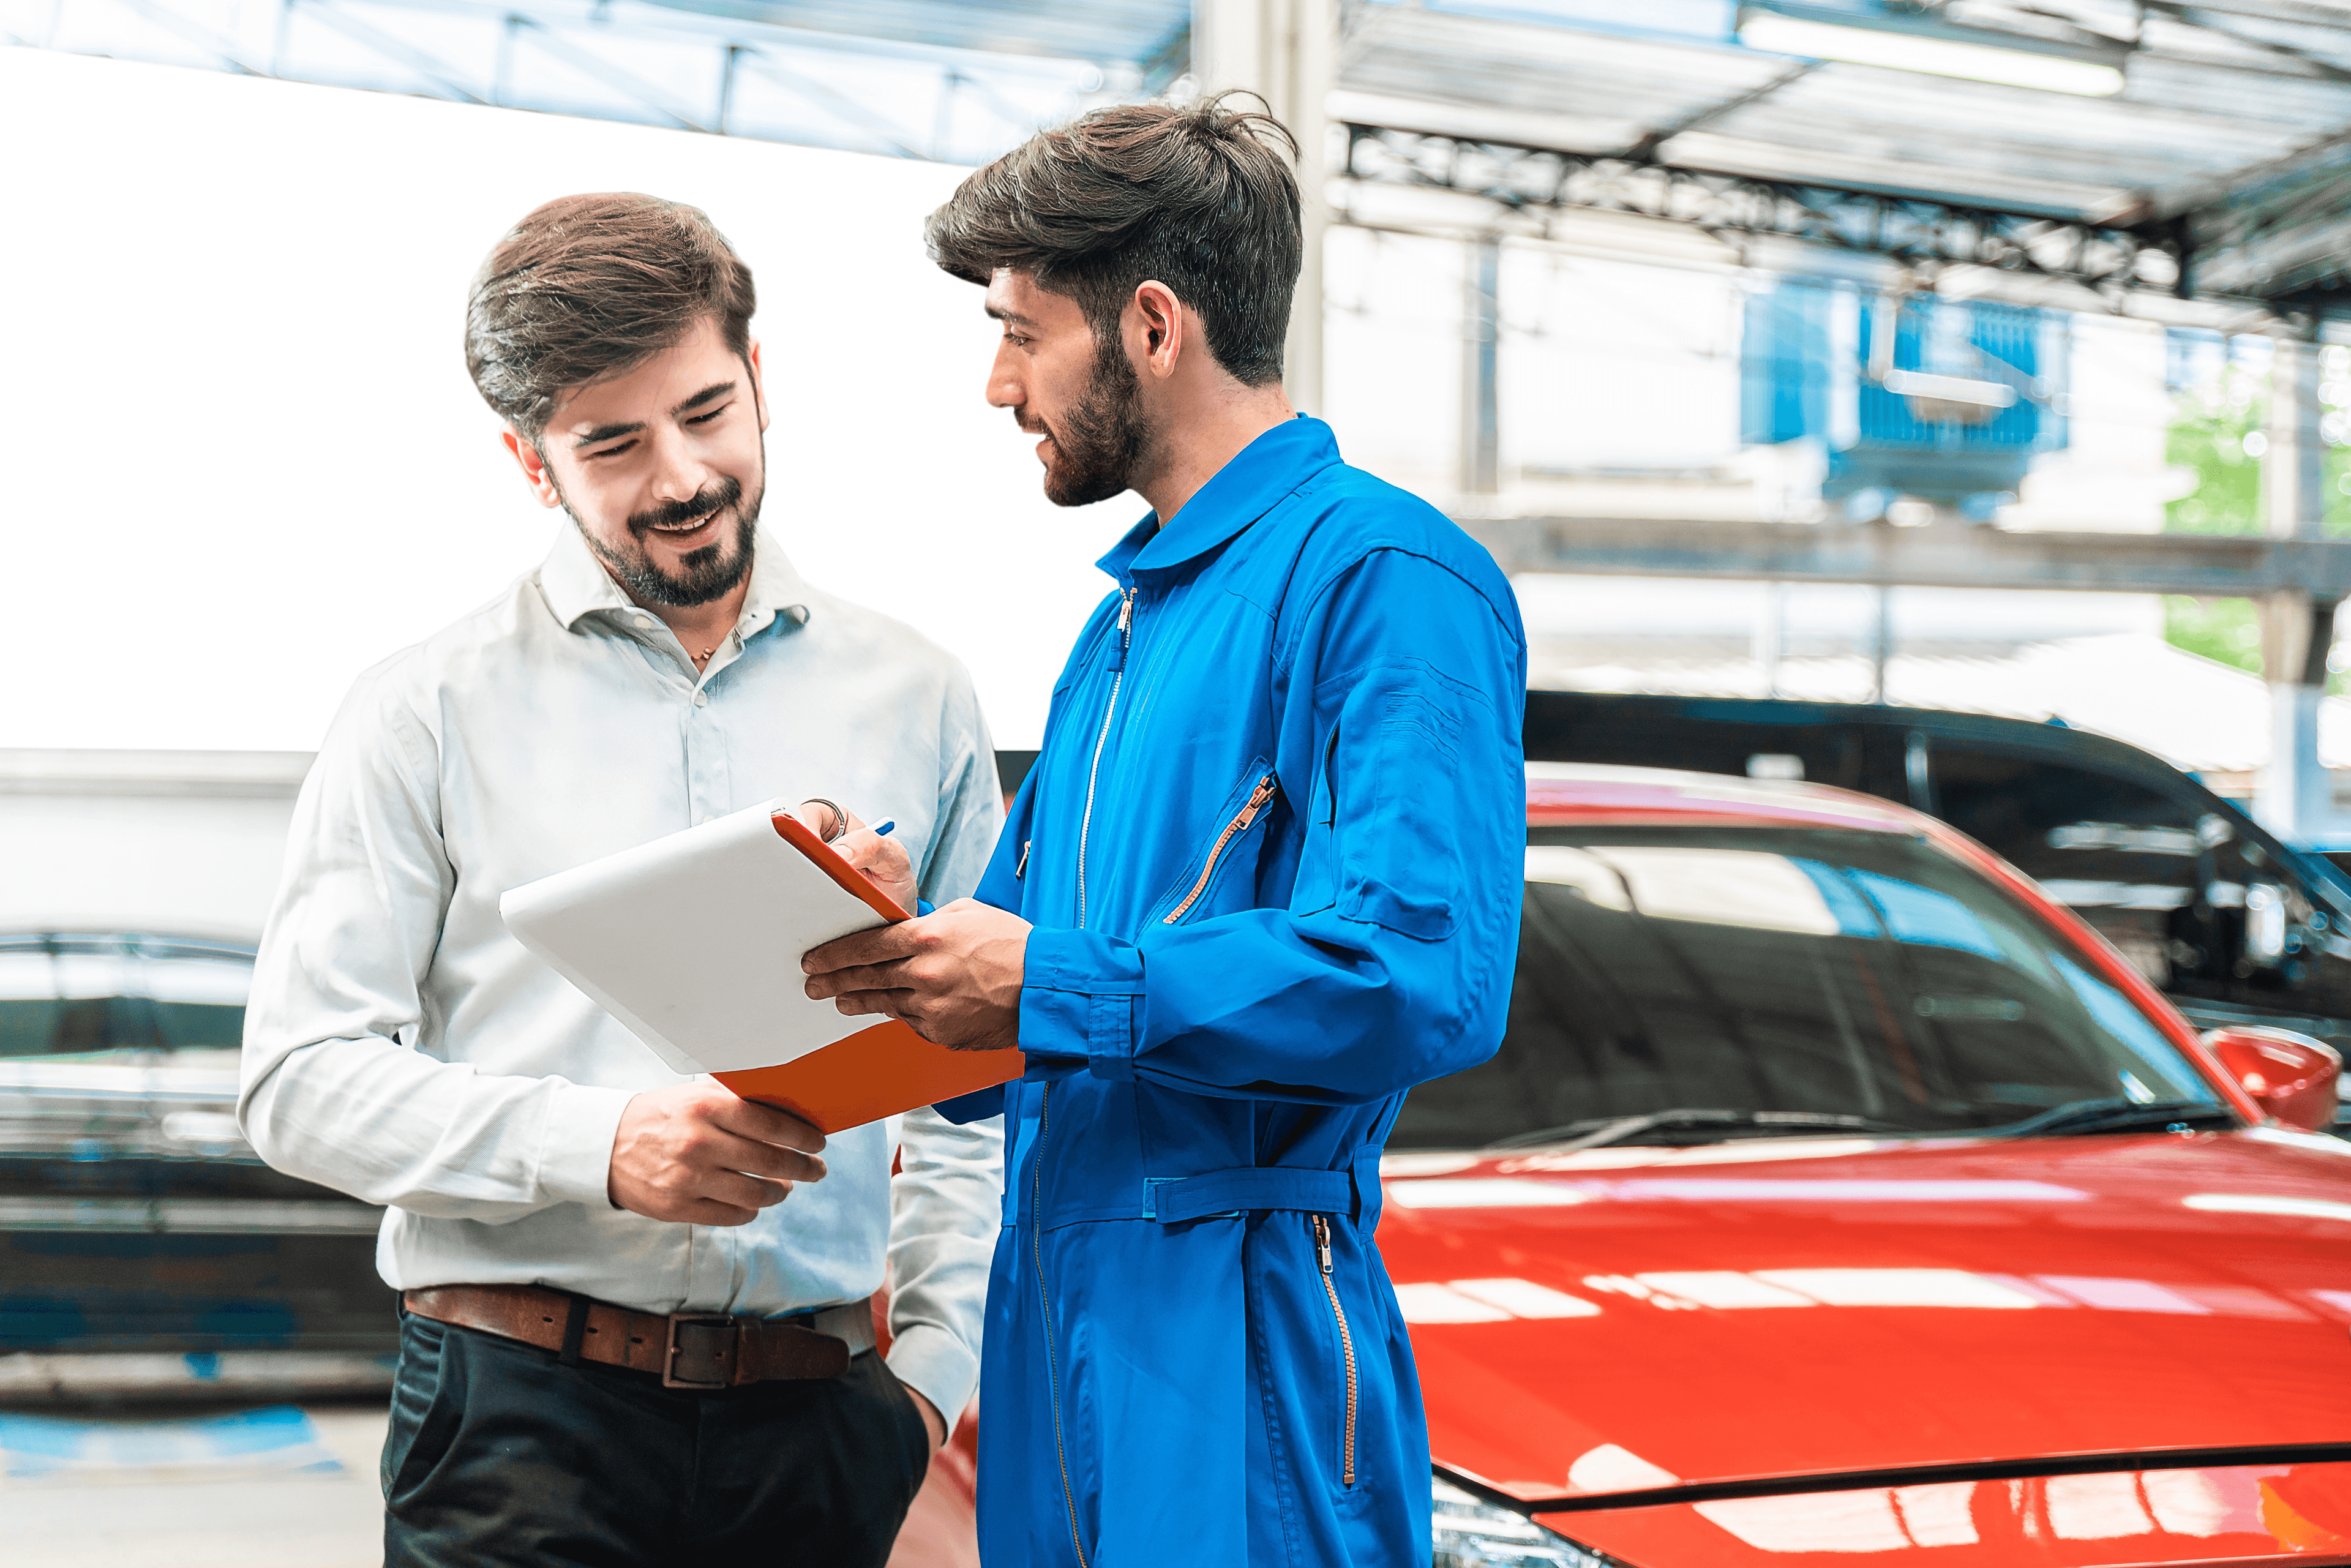 Professional and helpful car technicians